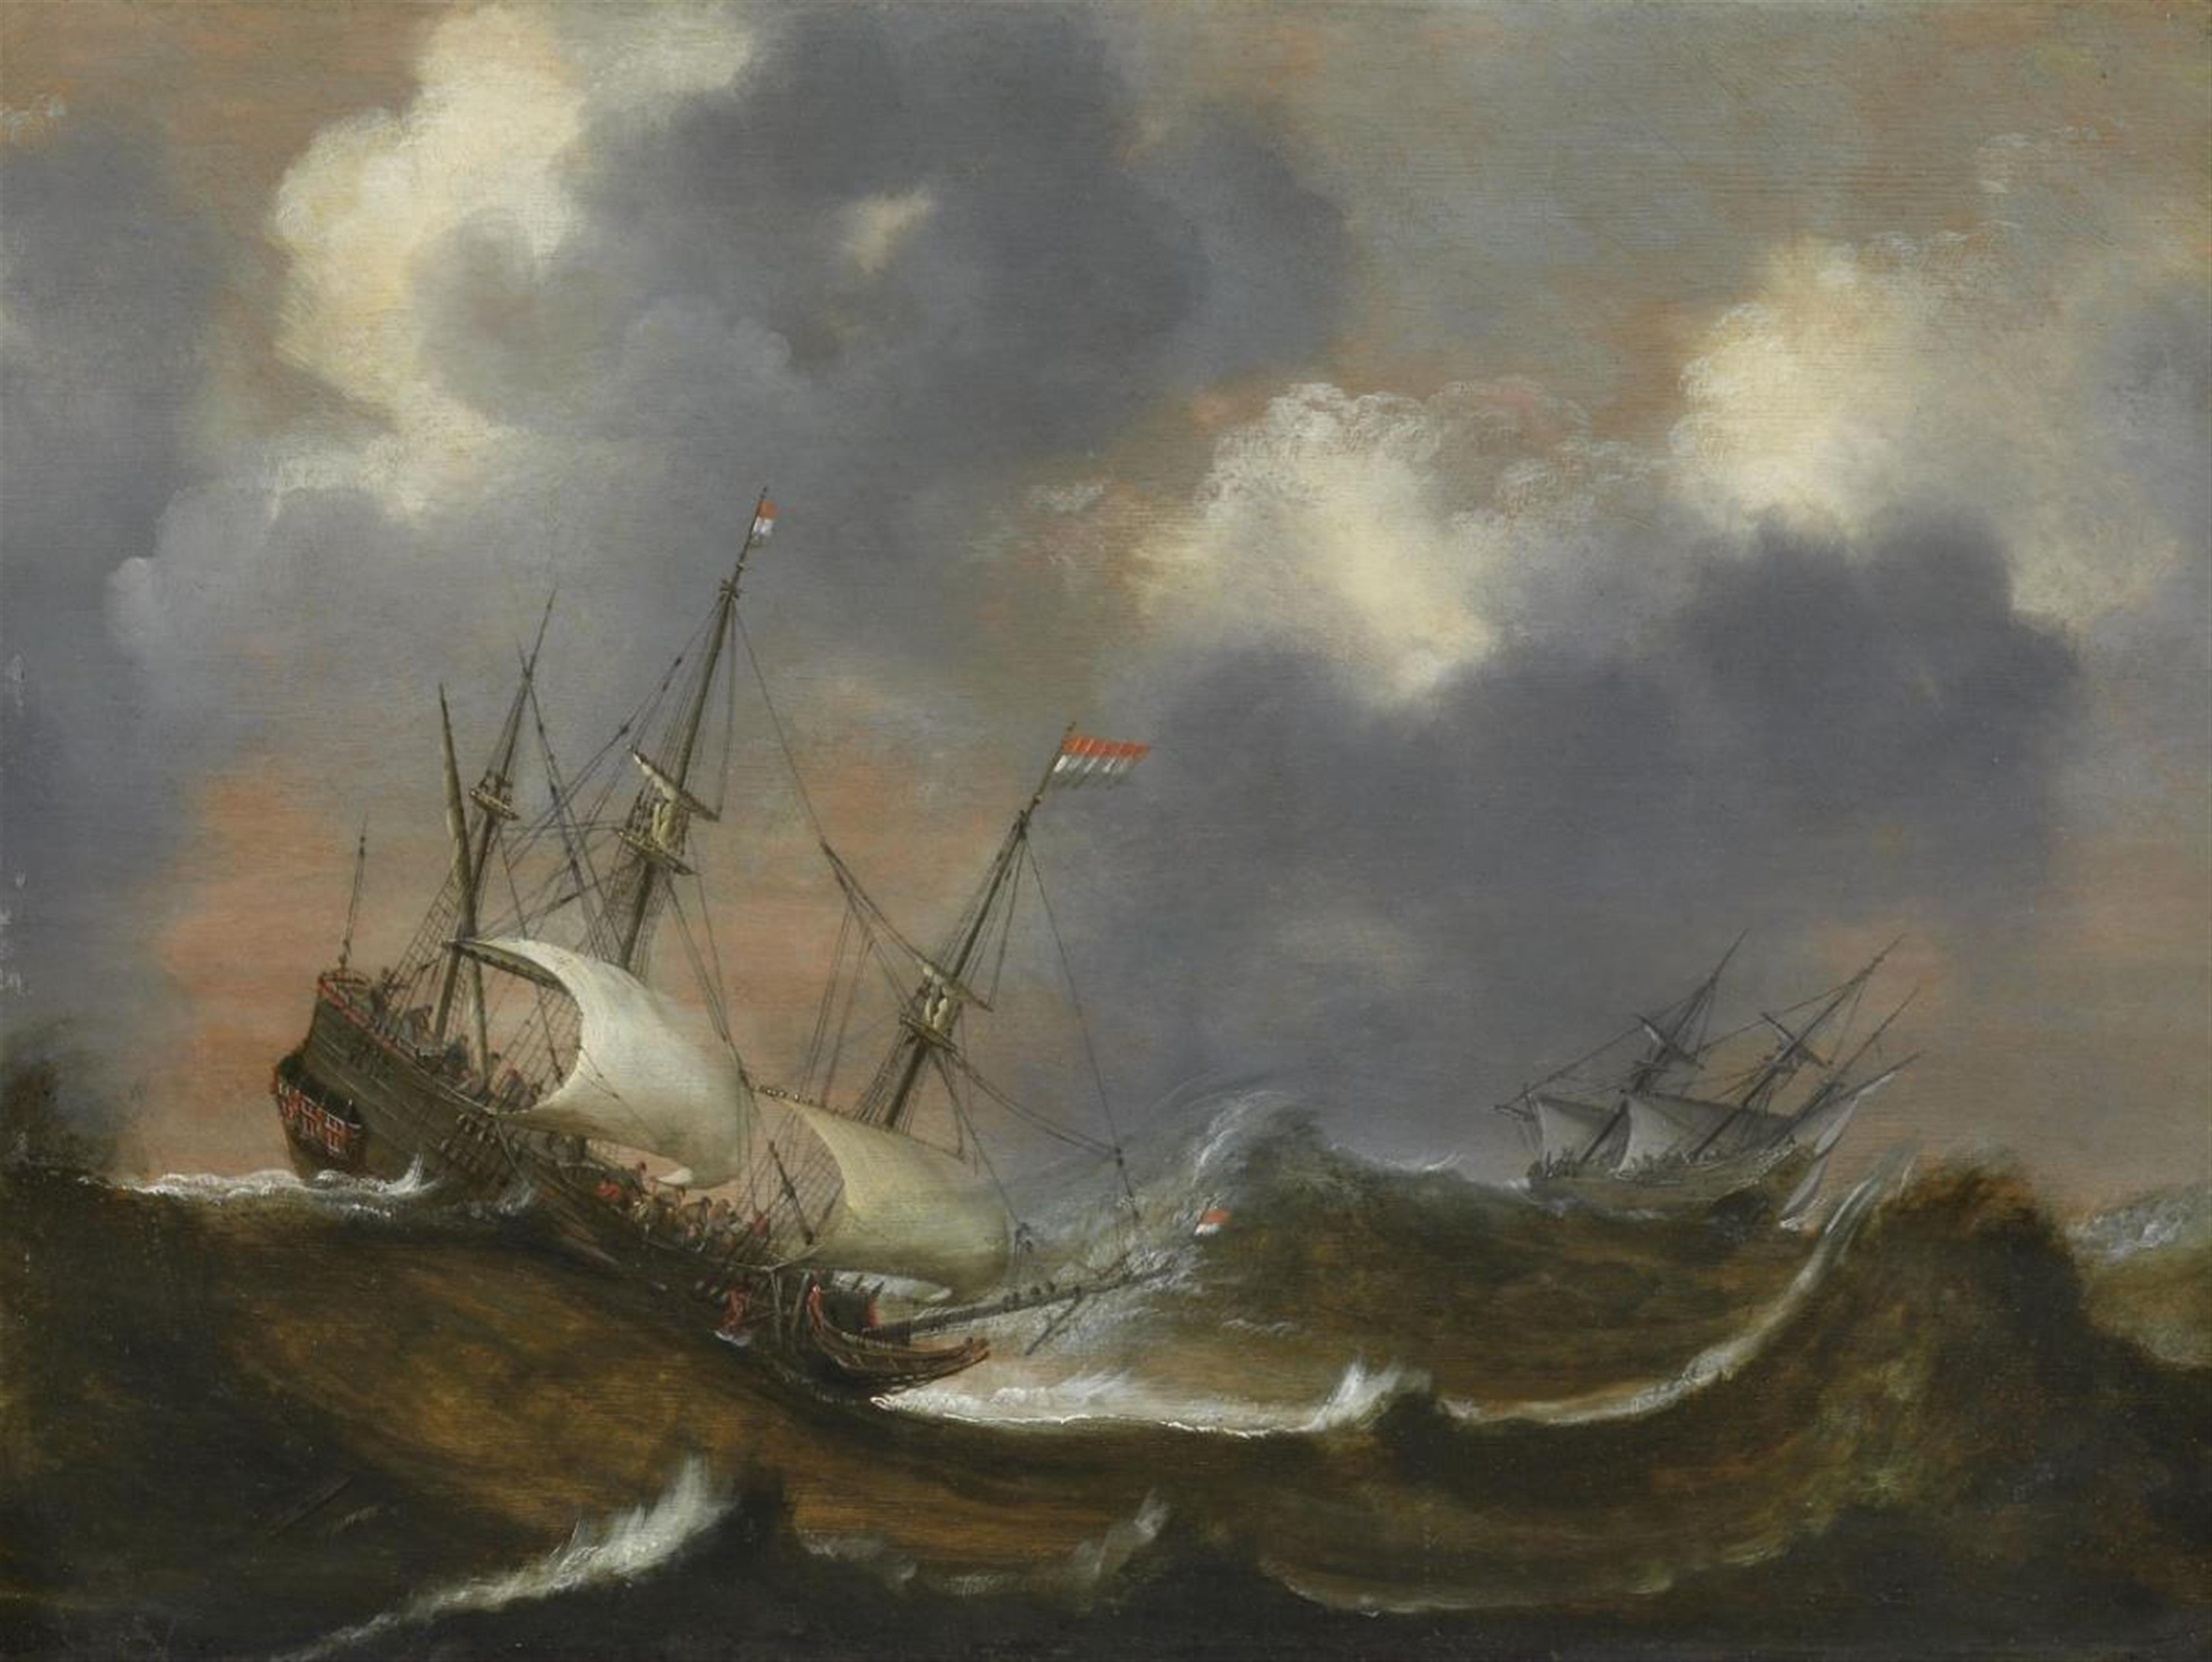 Claes Claesz. Wou - BATTLE SHIPS IN A STORMY SEA - image-1